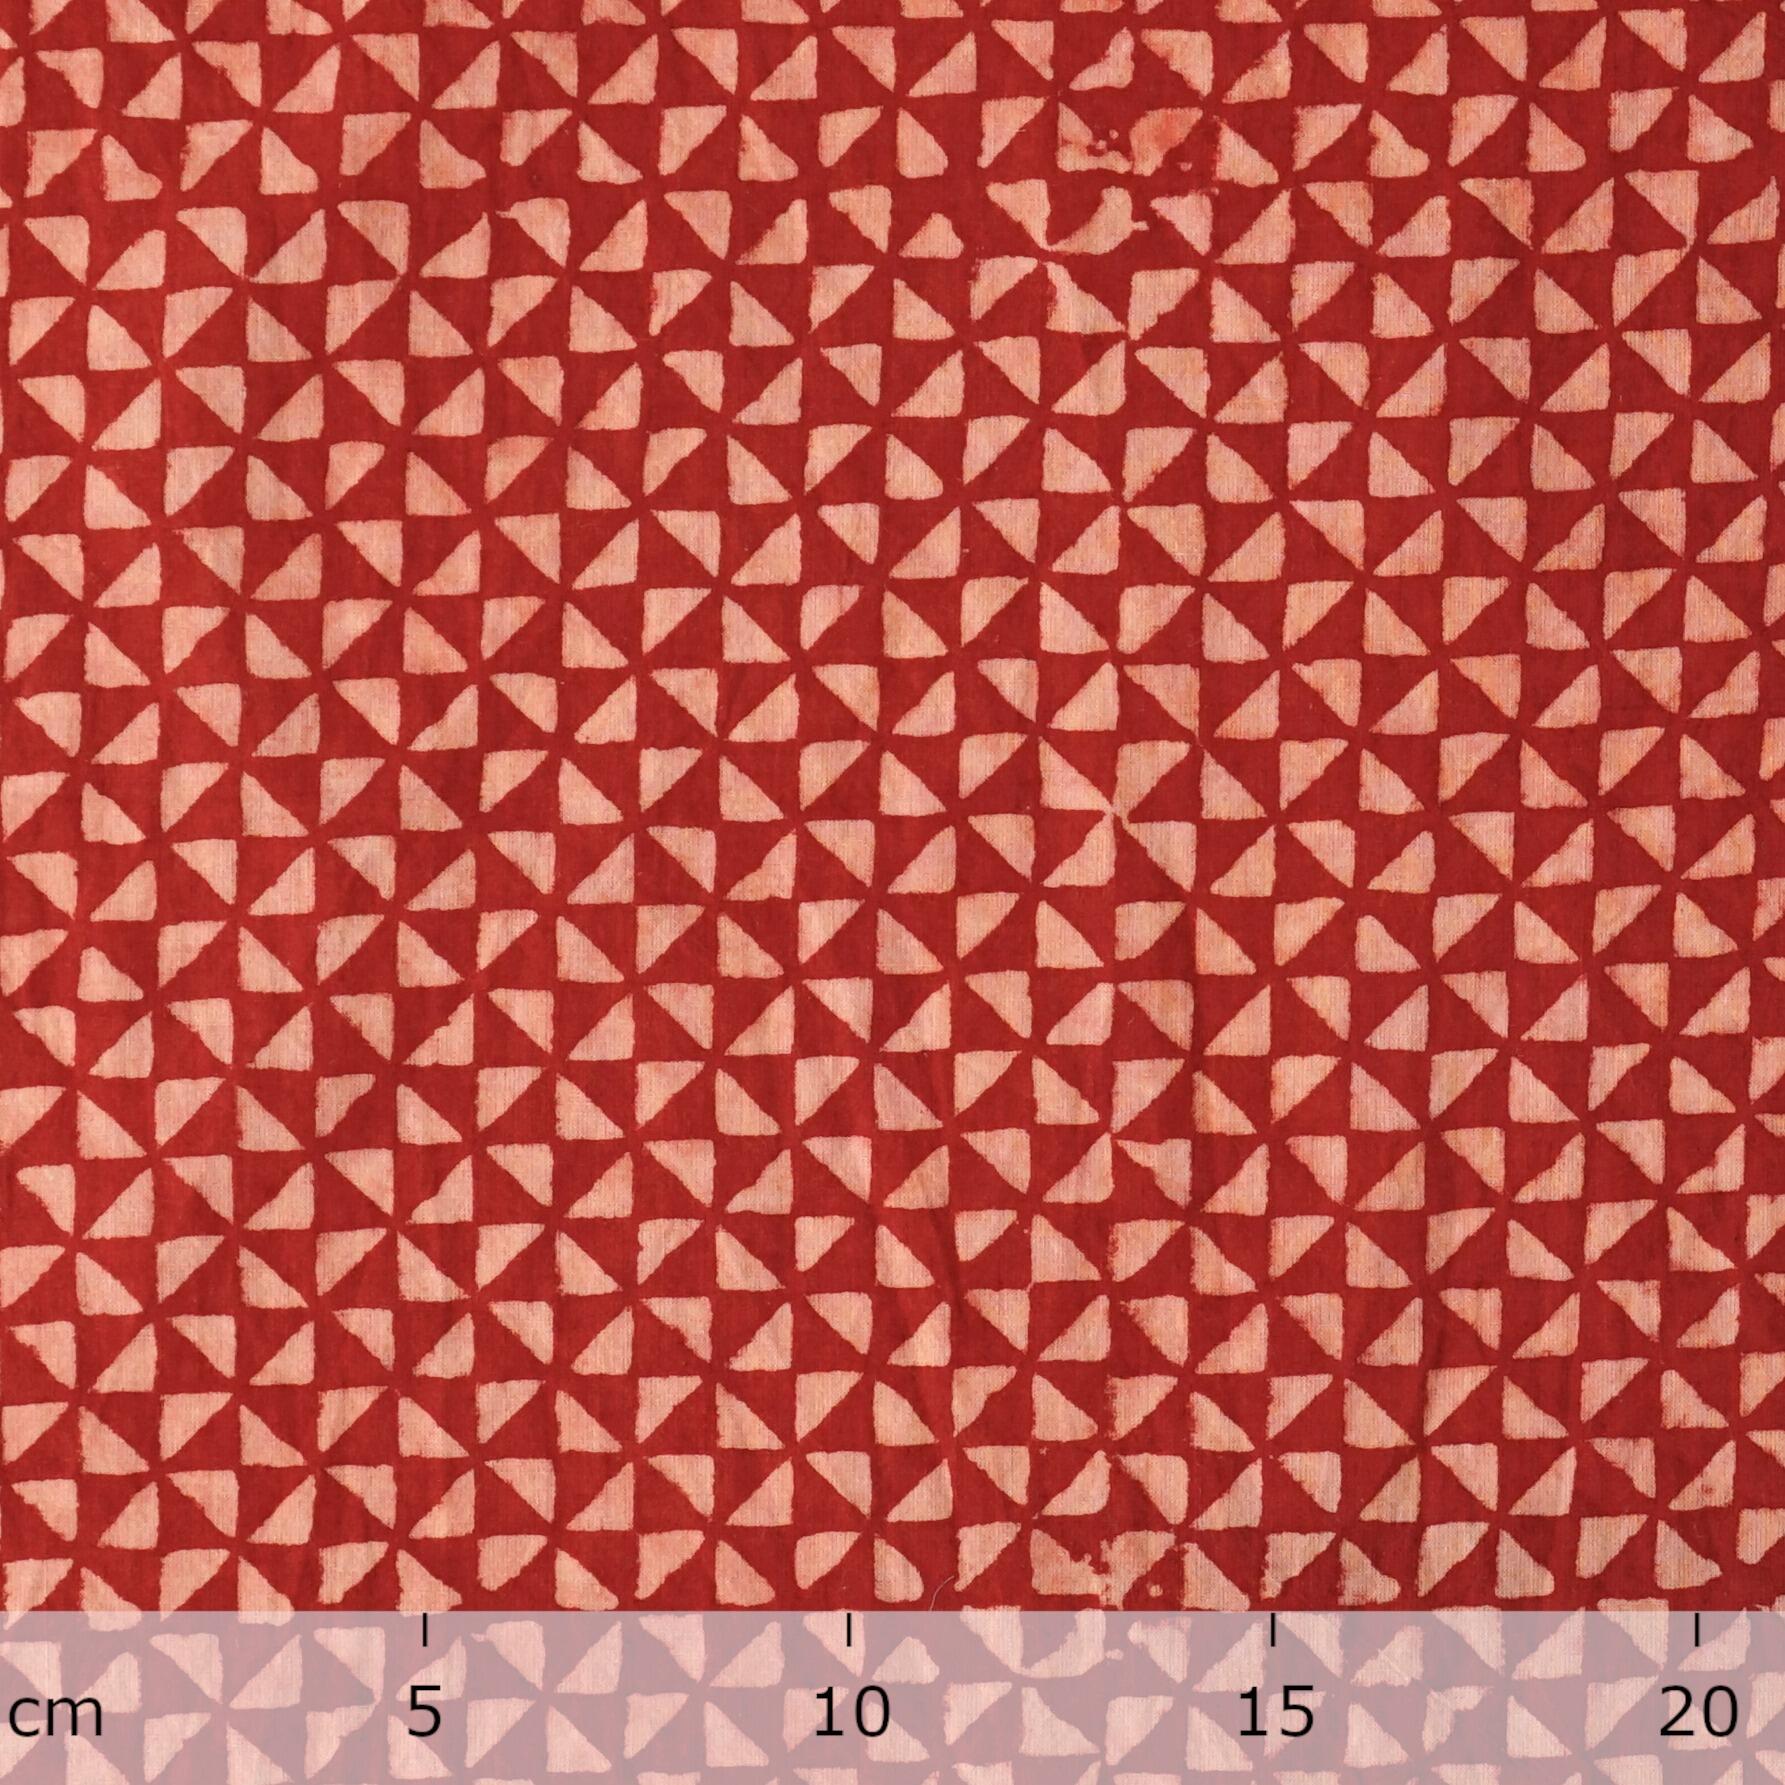 100% Block-Printed Cotton - Hourglass Print - Red & White - Ruler